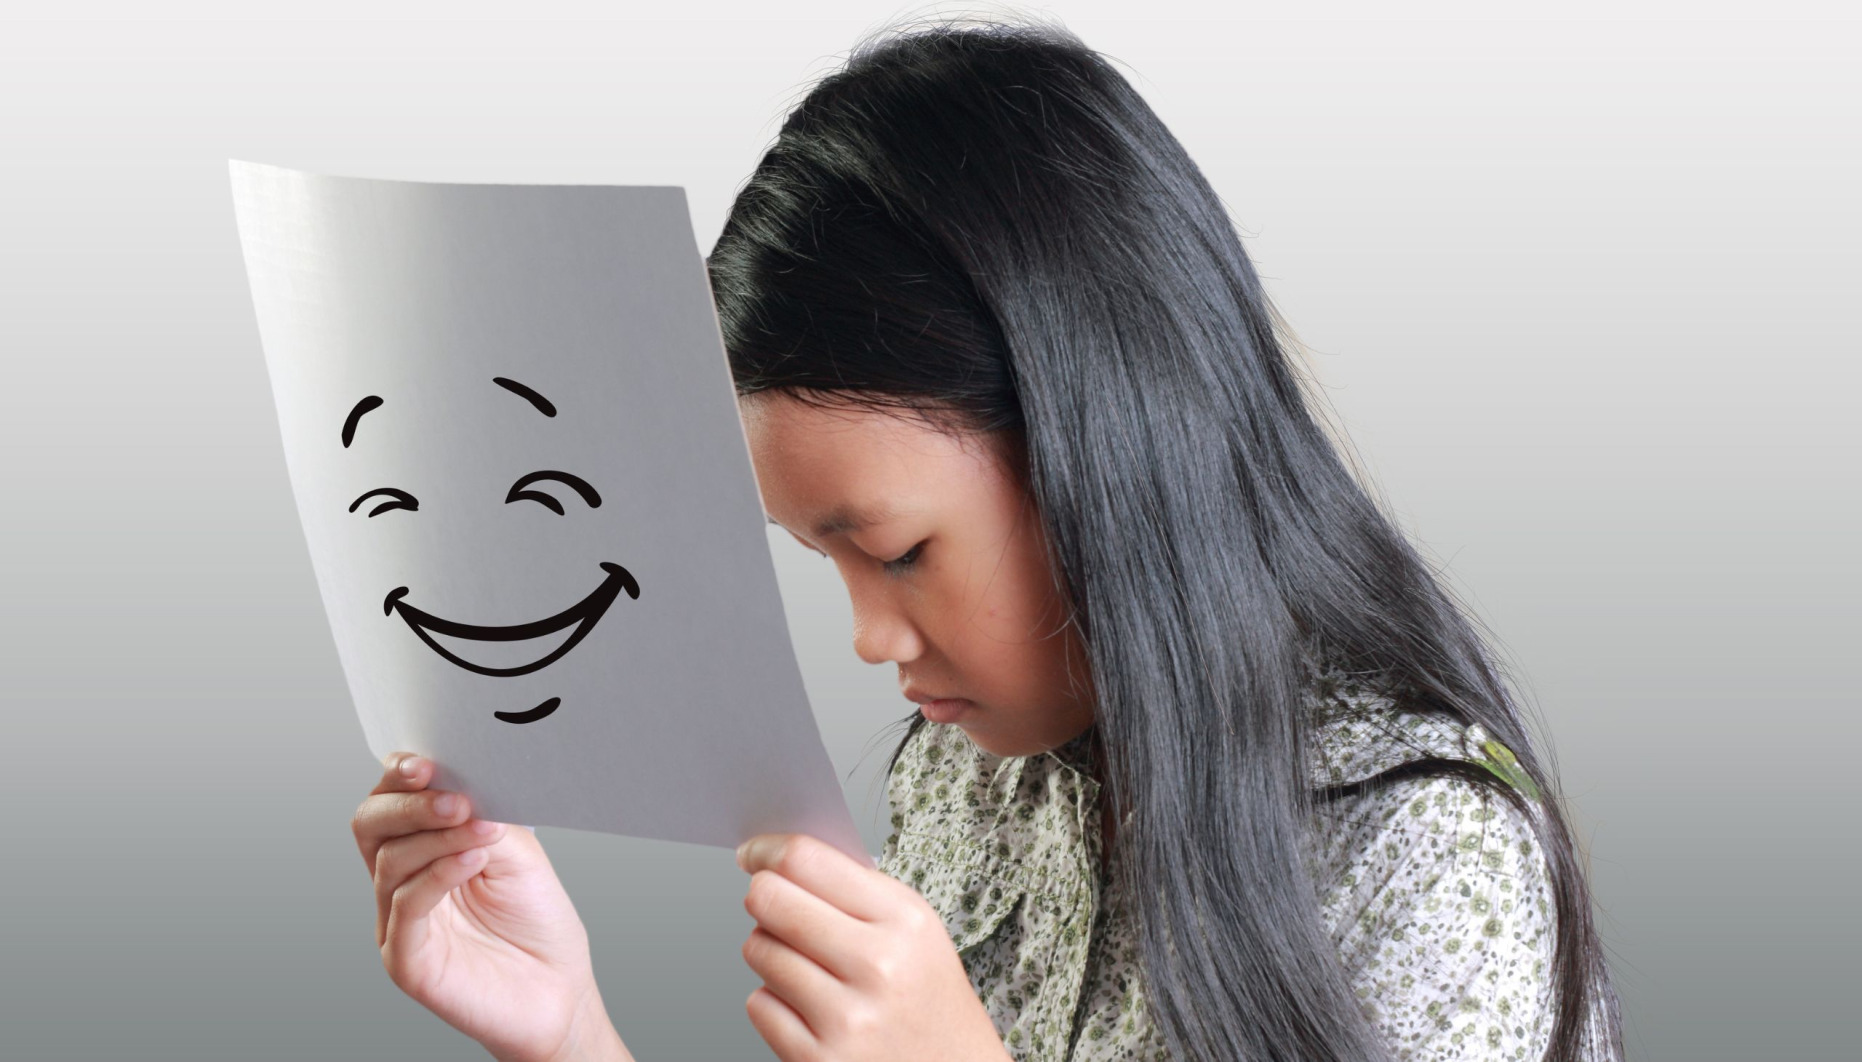 A sad young girl holding a piece of paper in front of her face. There is a smiling face drawrn on the paper to illustrate that she is masking her real feelings